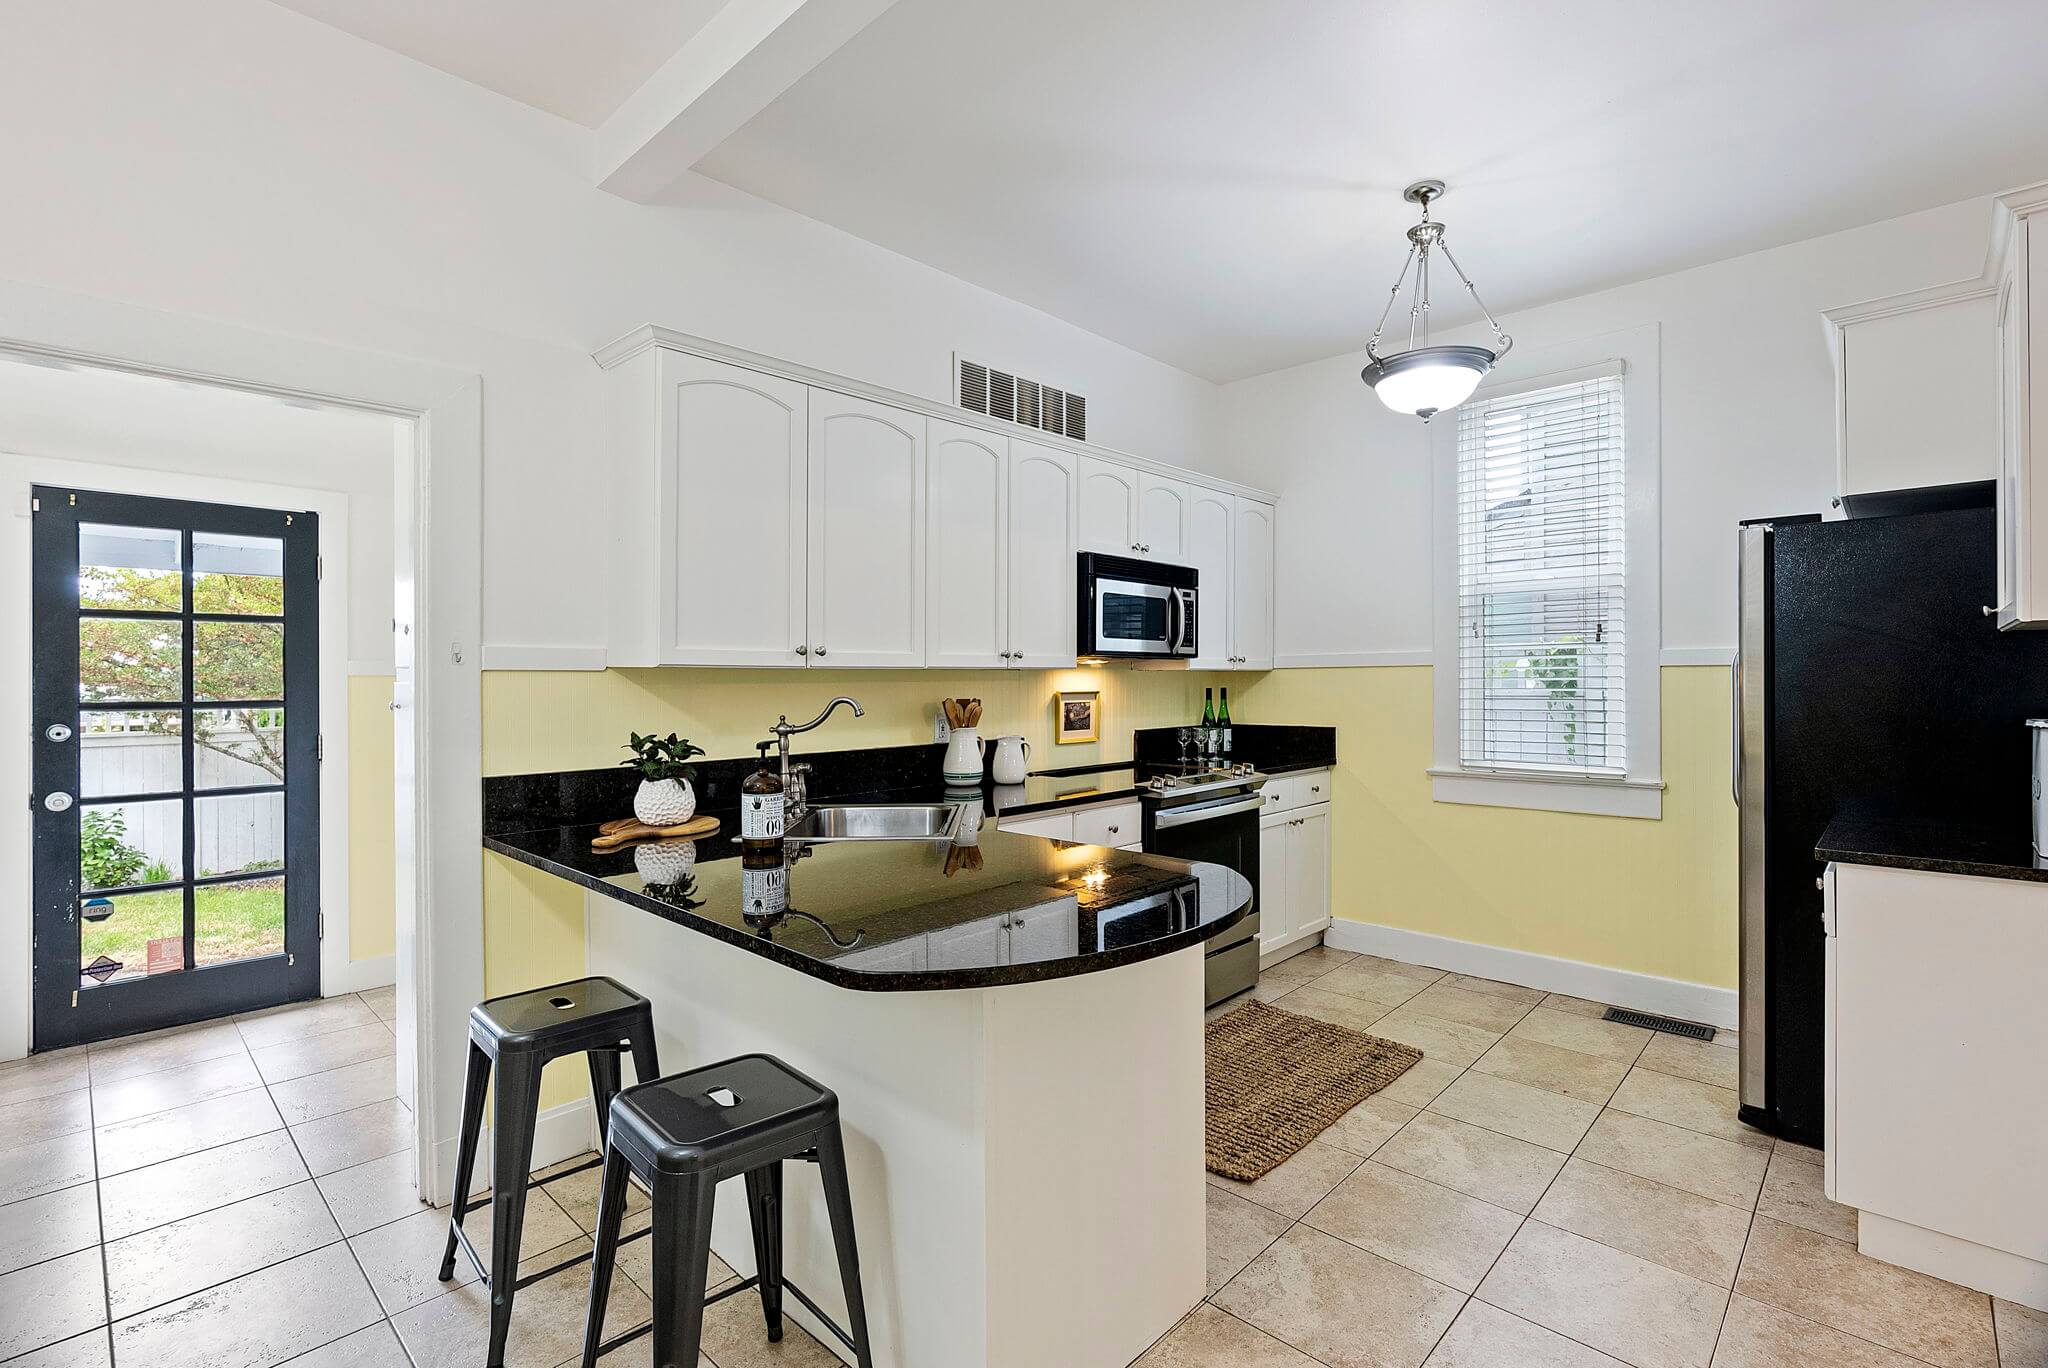 Updated eat-in kitchen with granite counters